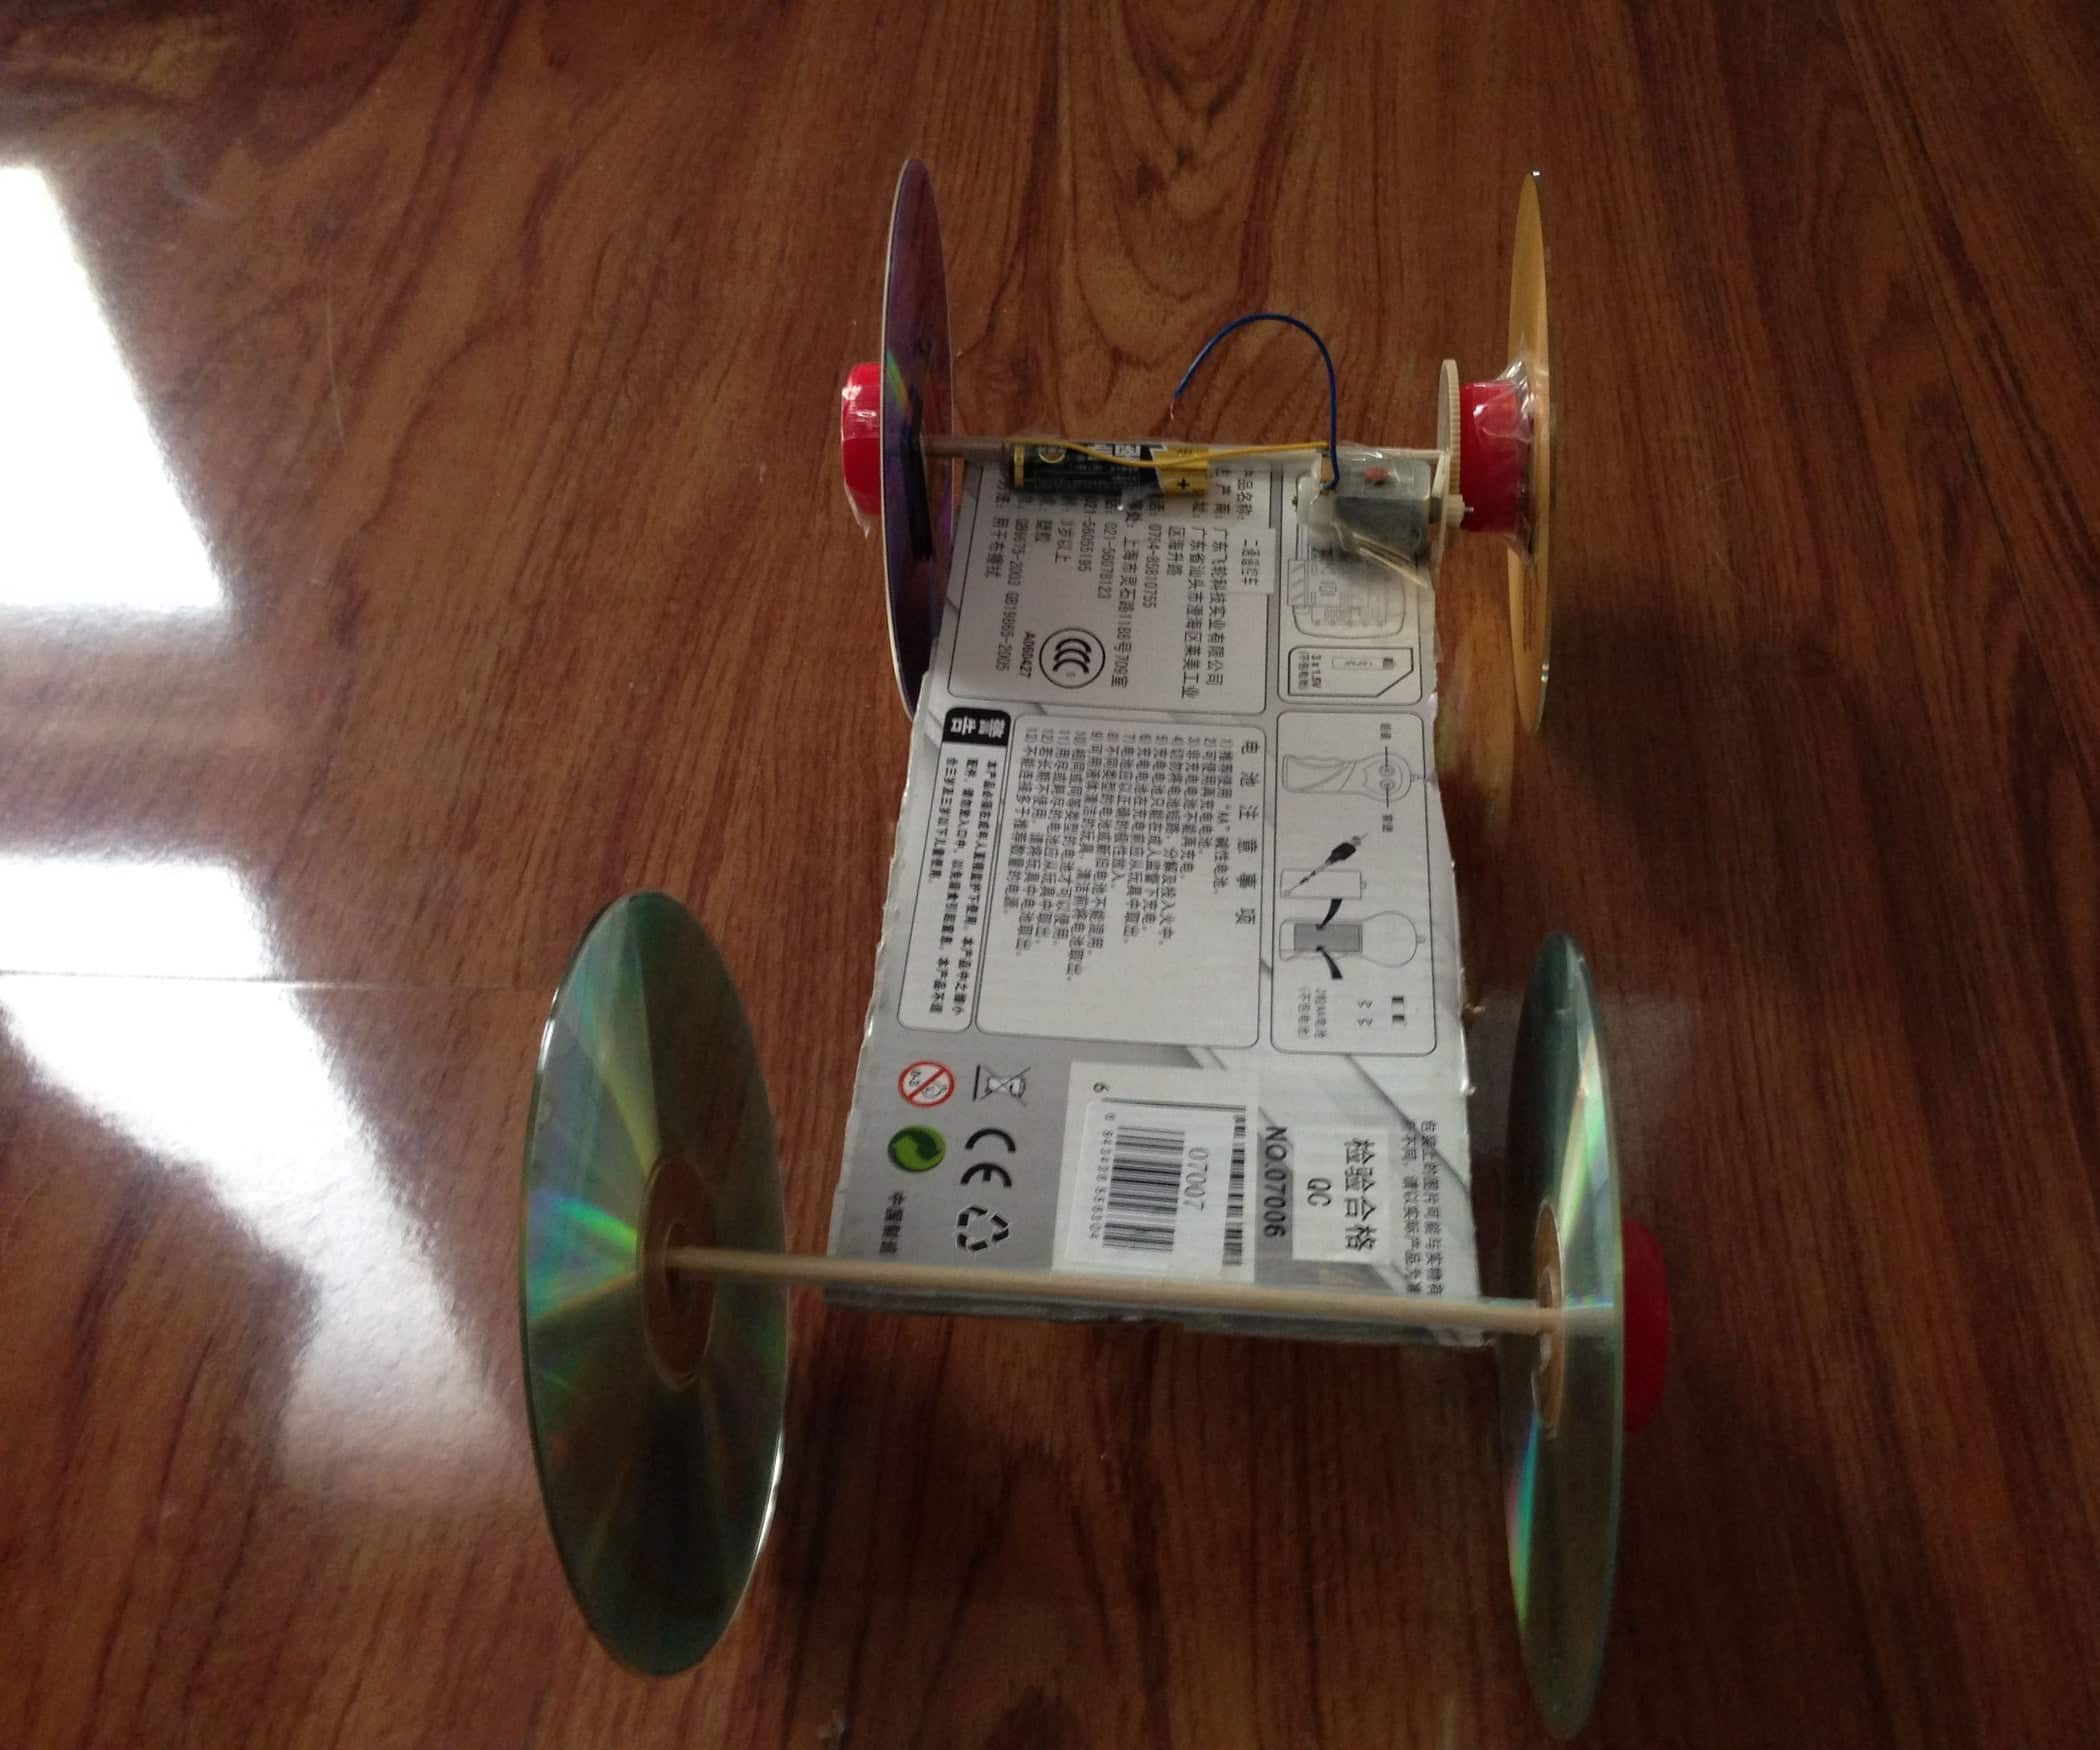 Using Home Materials to Build Car Toy : 10 Steps